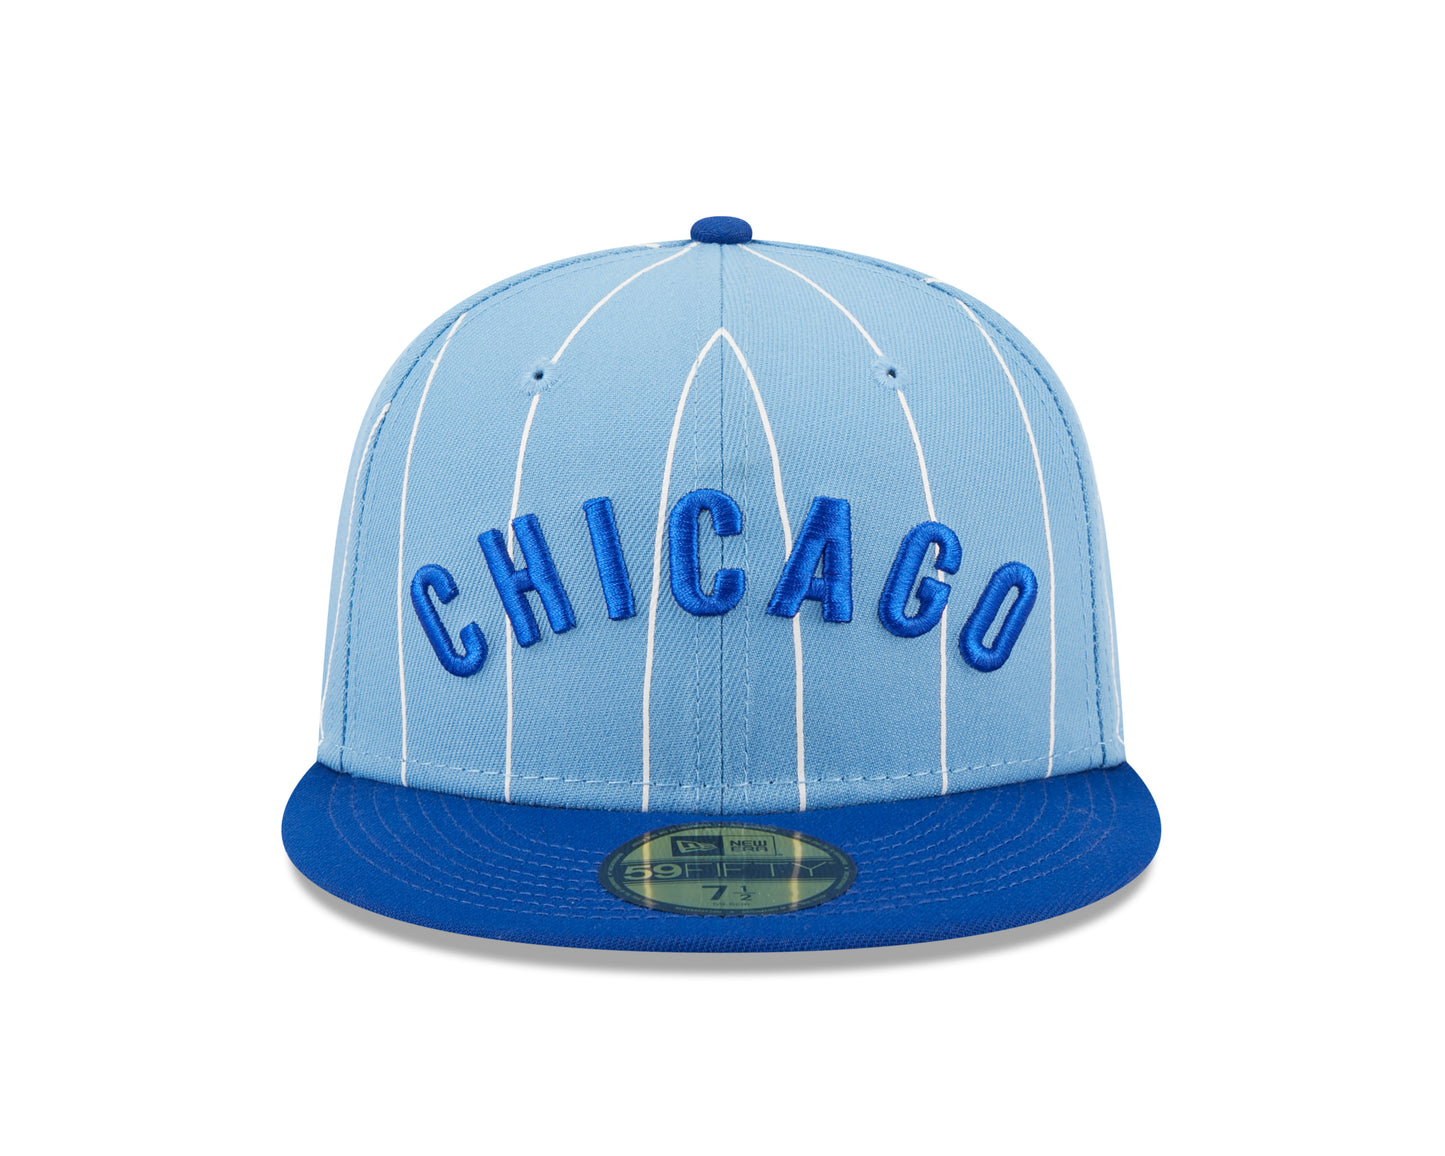 New Era - Chicago Cubs - 59Fifty Fitted - Powder Blues - Sky Blue - Headz Up 